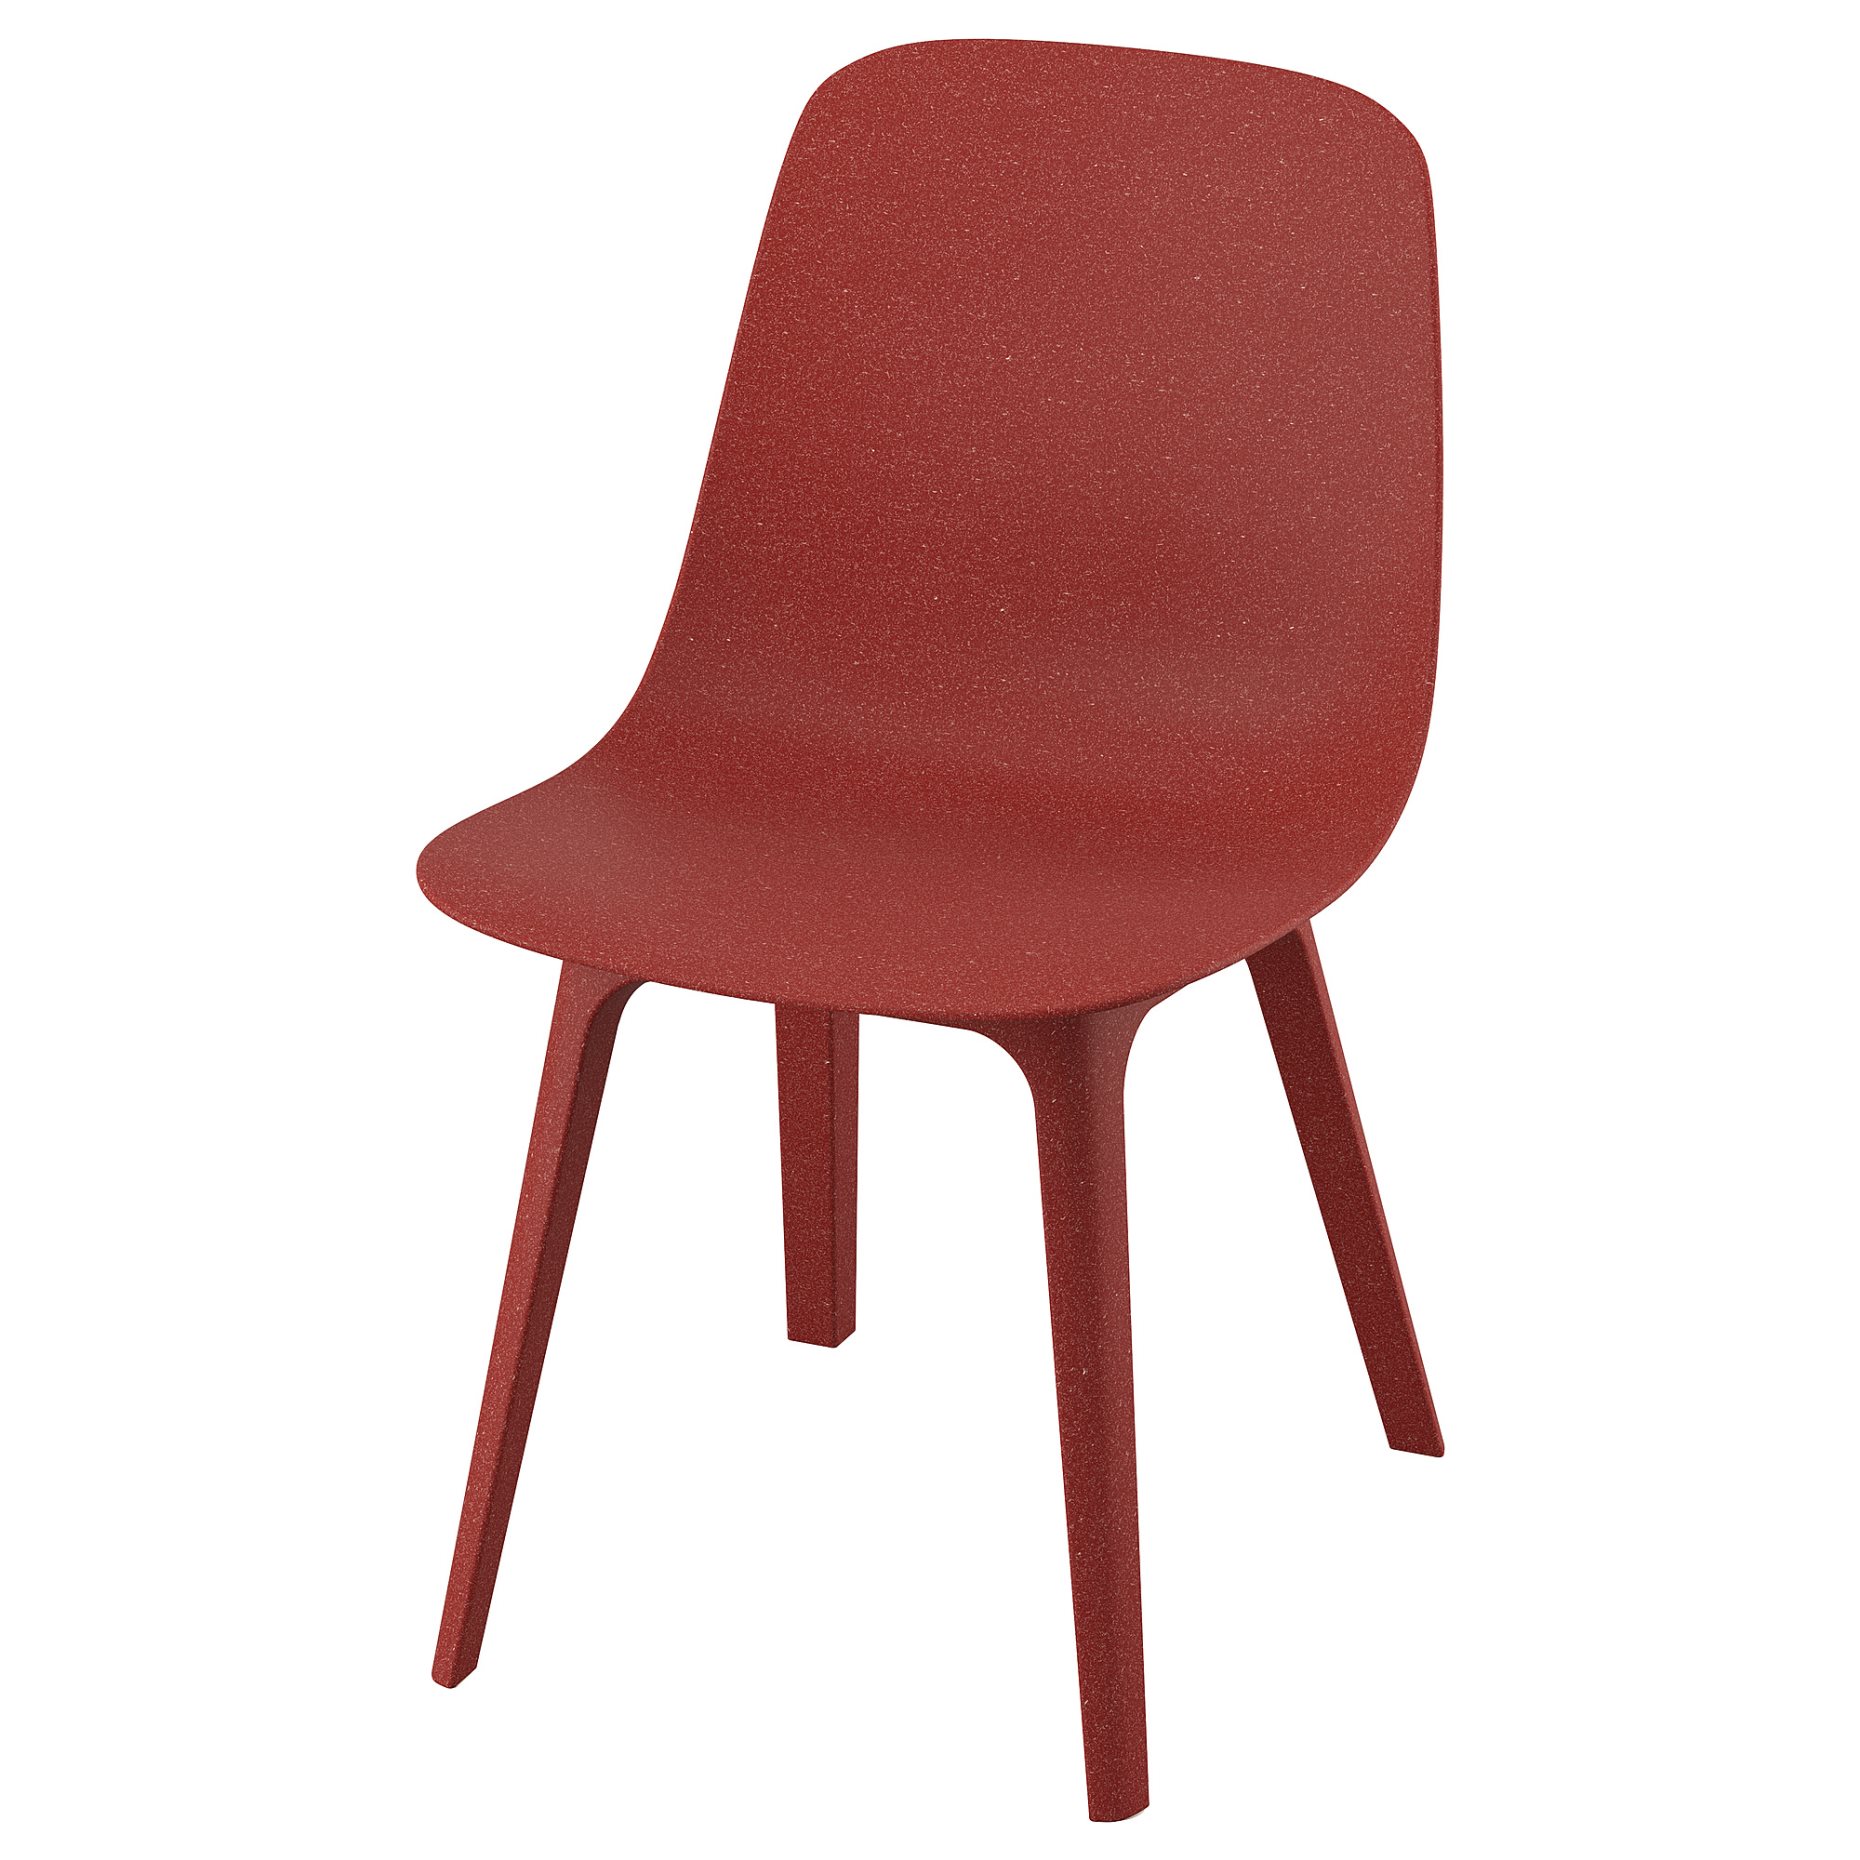 ODGER, chair, 705.165.52